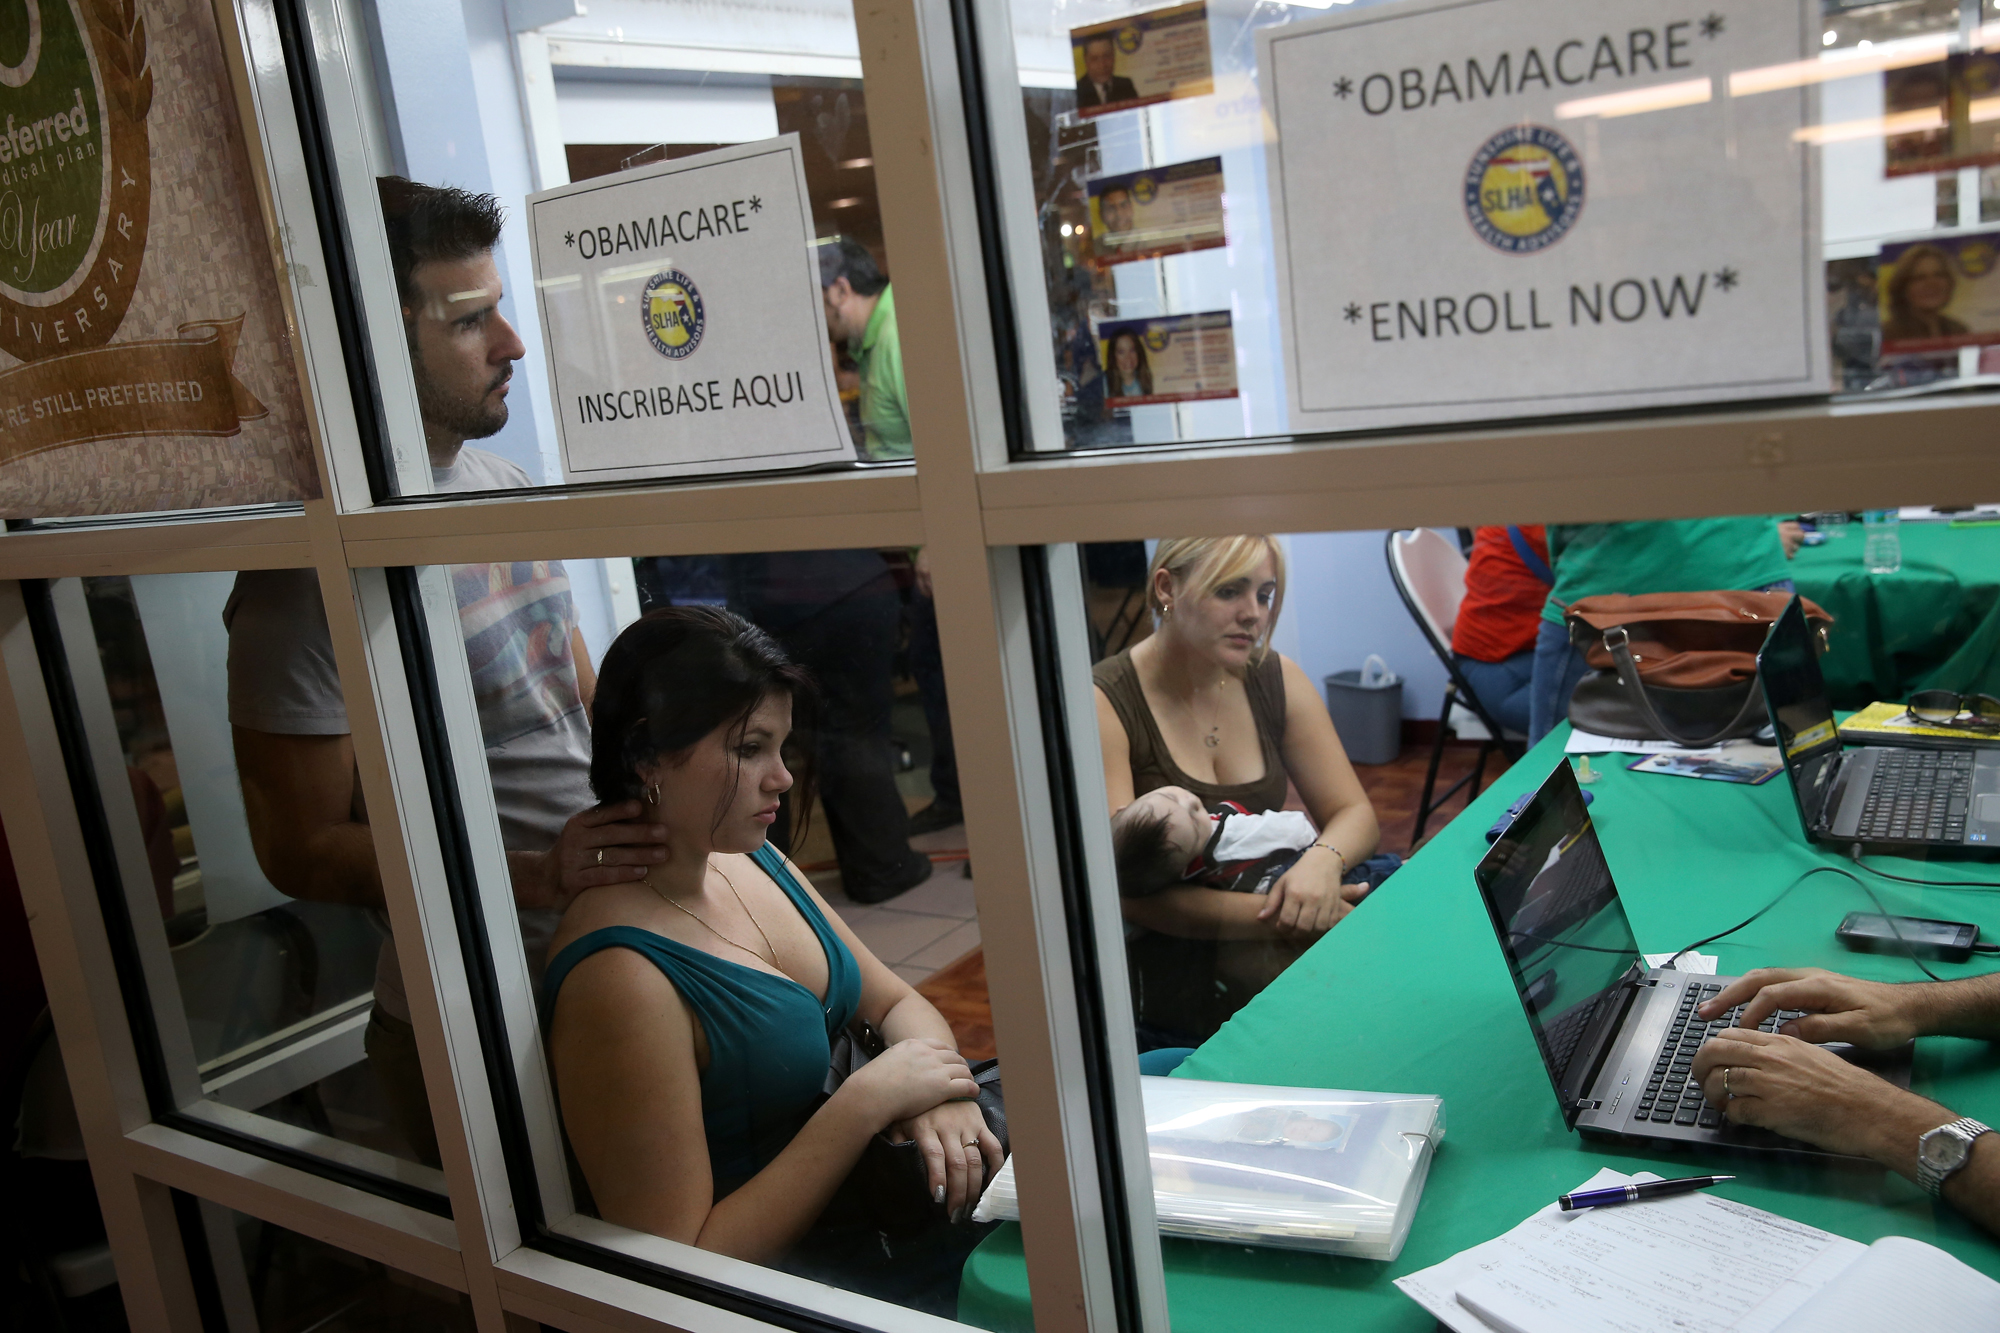 Ronnie Cabrera, Dailem Delombard and Maylin Lezcano holding Lucas Cabrera sit with an insurance agent from Sunshine Life and Health Advisors as they try to purchase health insurance under the Affordable Care Act at the kiosk setup at the Mall of Americas on January 15, 2014 in Miami.